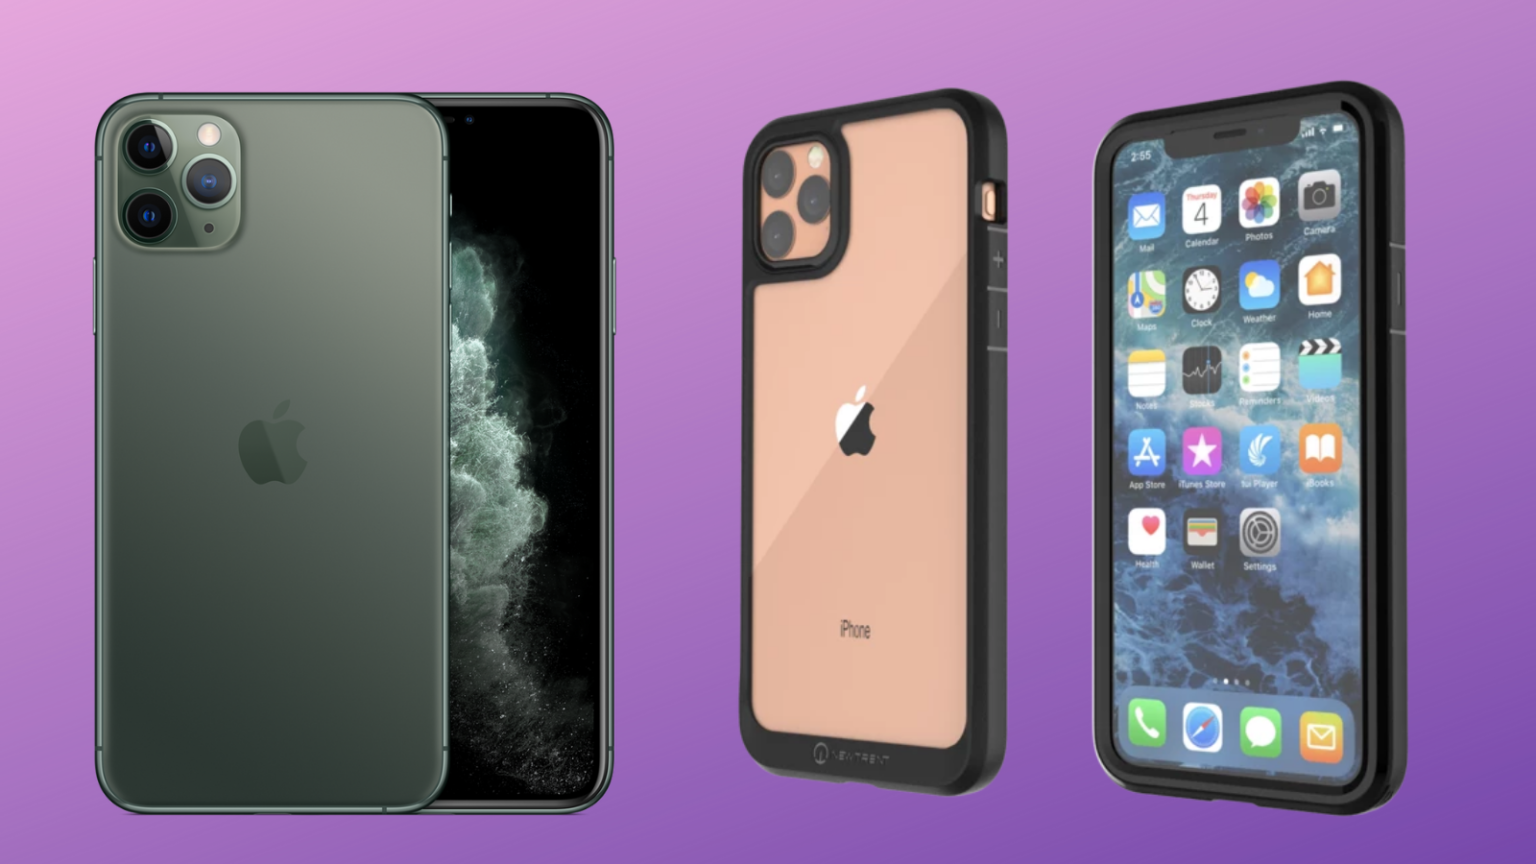 how much money is the iphone 11 pro